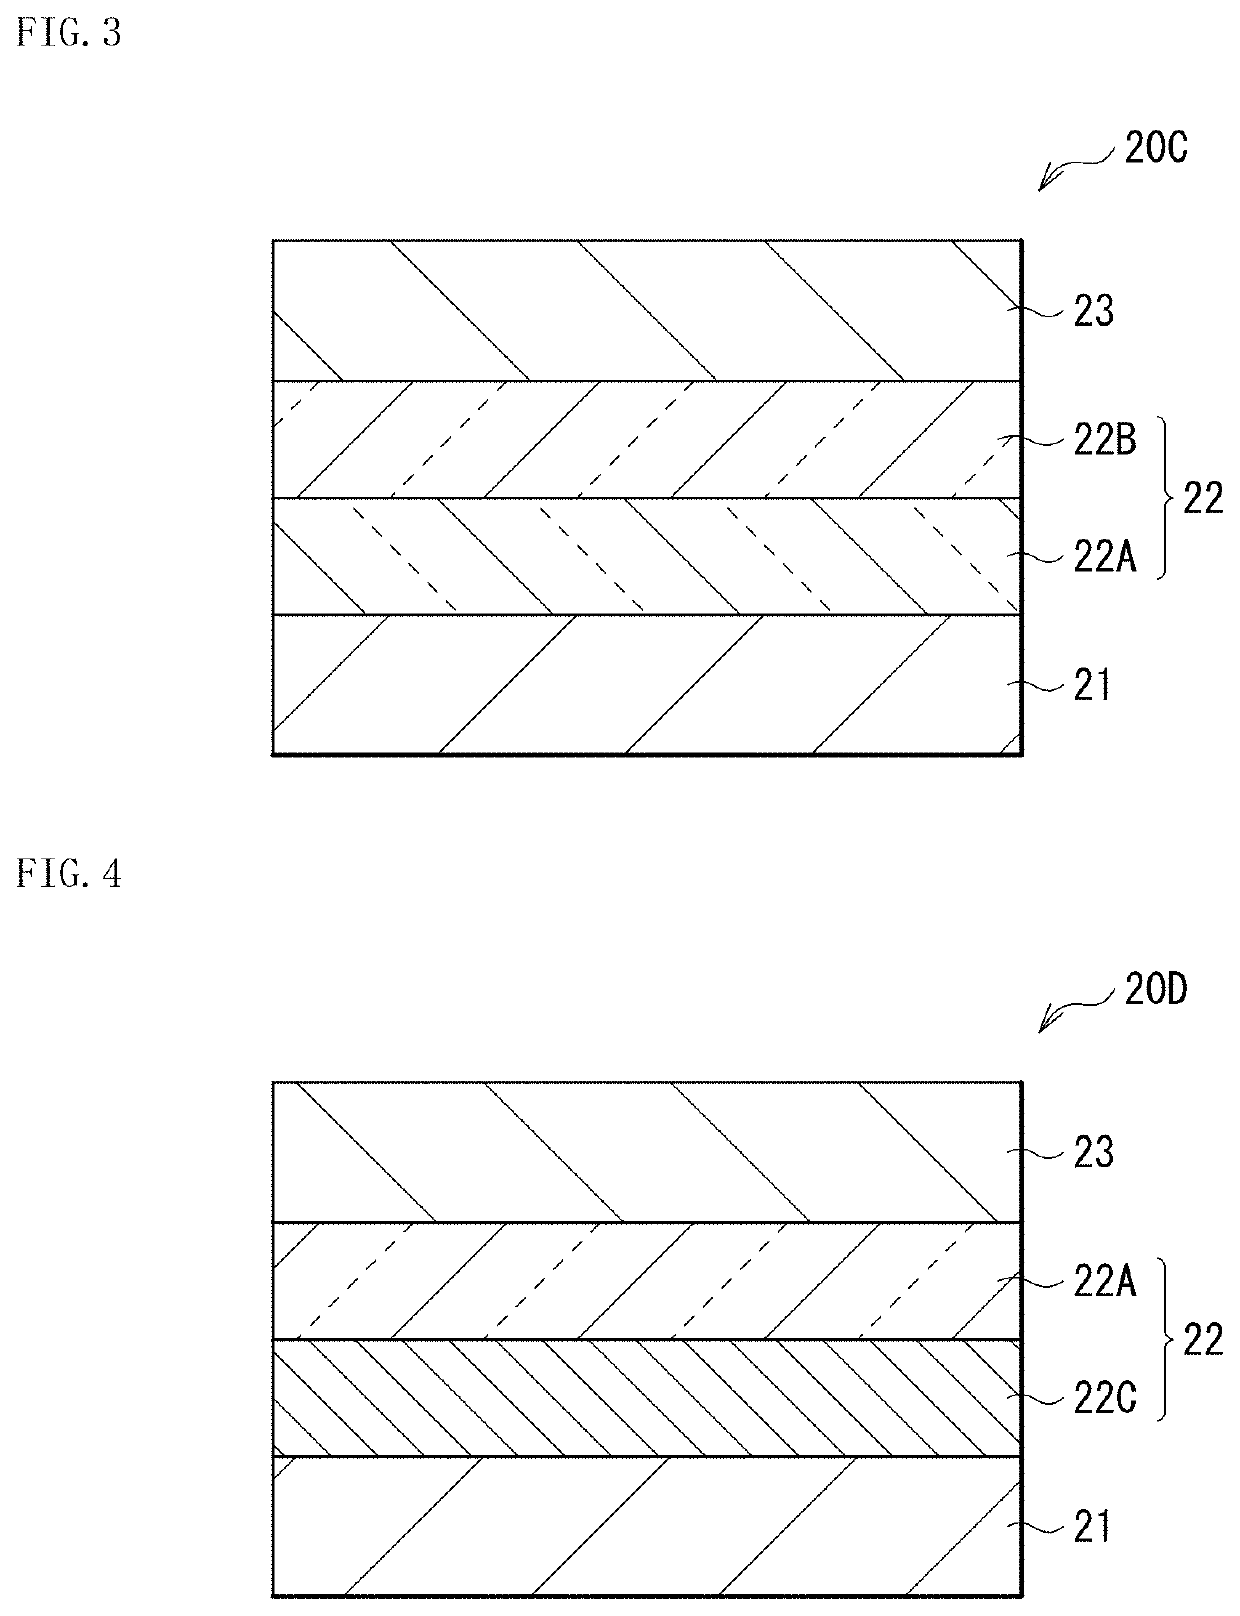 Switch device, storage apparatus, and memory system incorporating boron and carbon